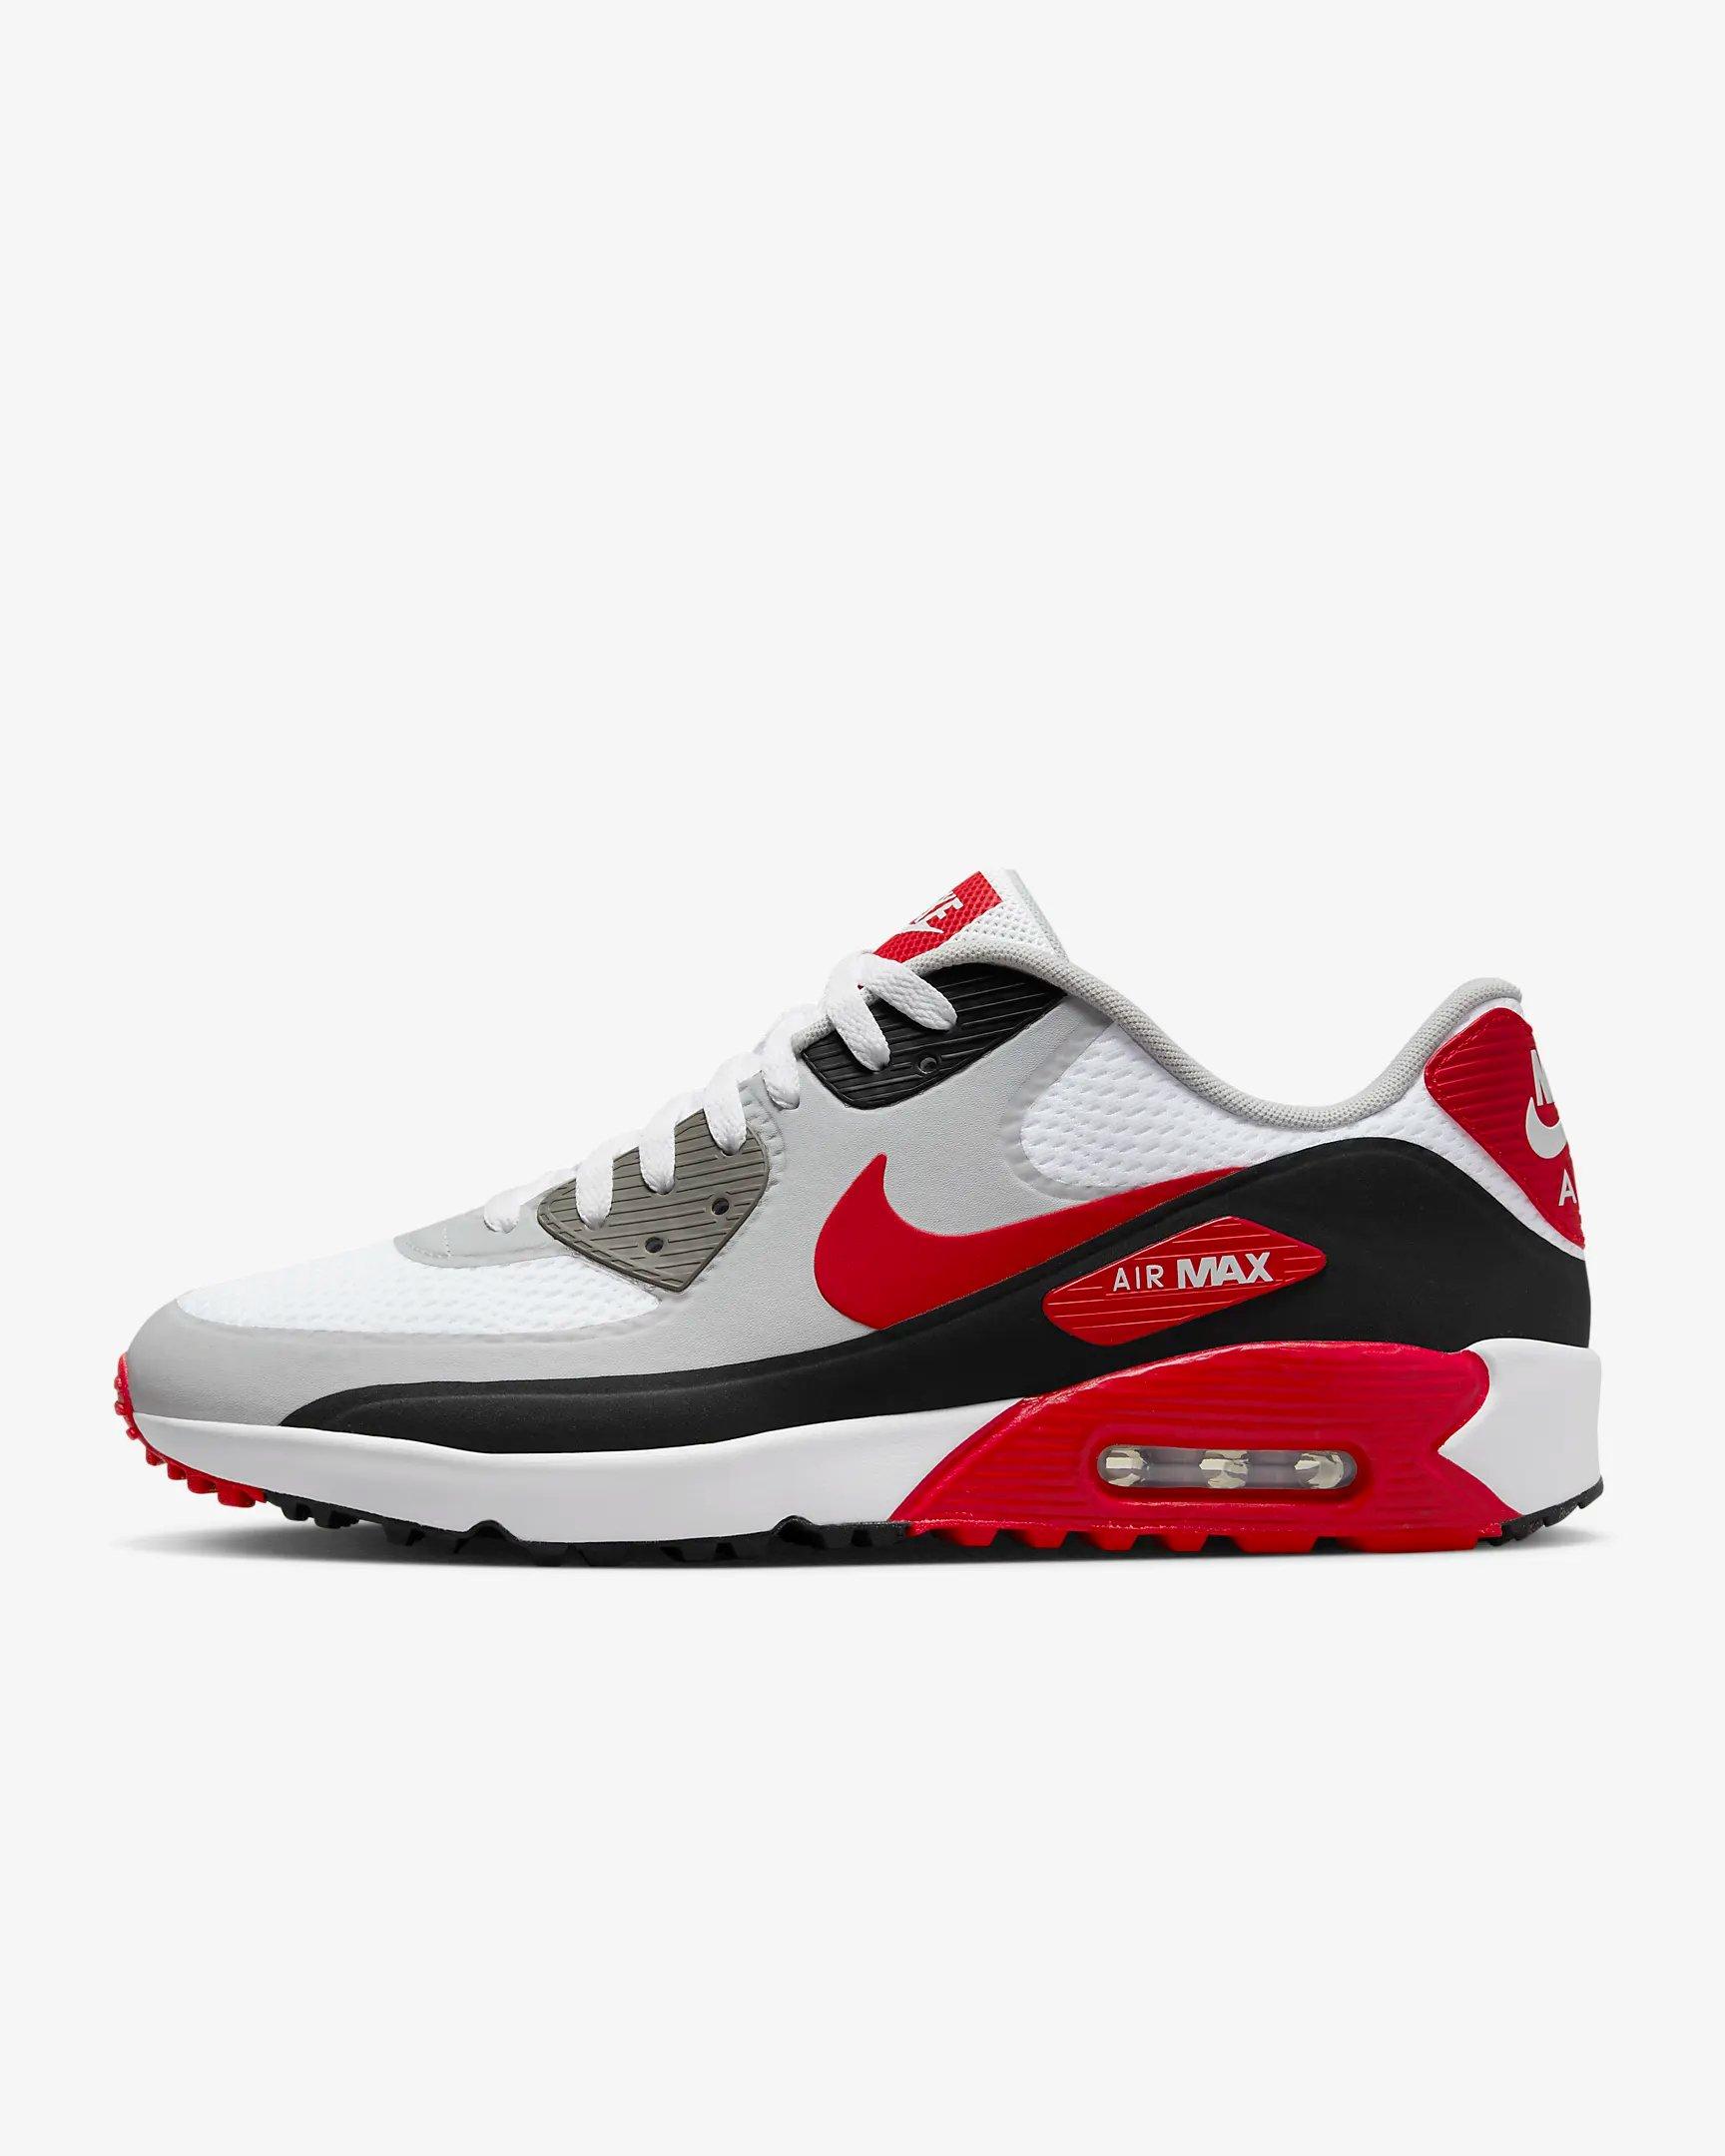 Air Max 90 G TB Spikeless Golf Shoe-White/Red | NIKE | Golf Shoes 